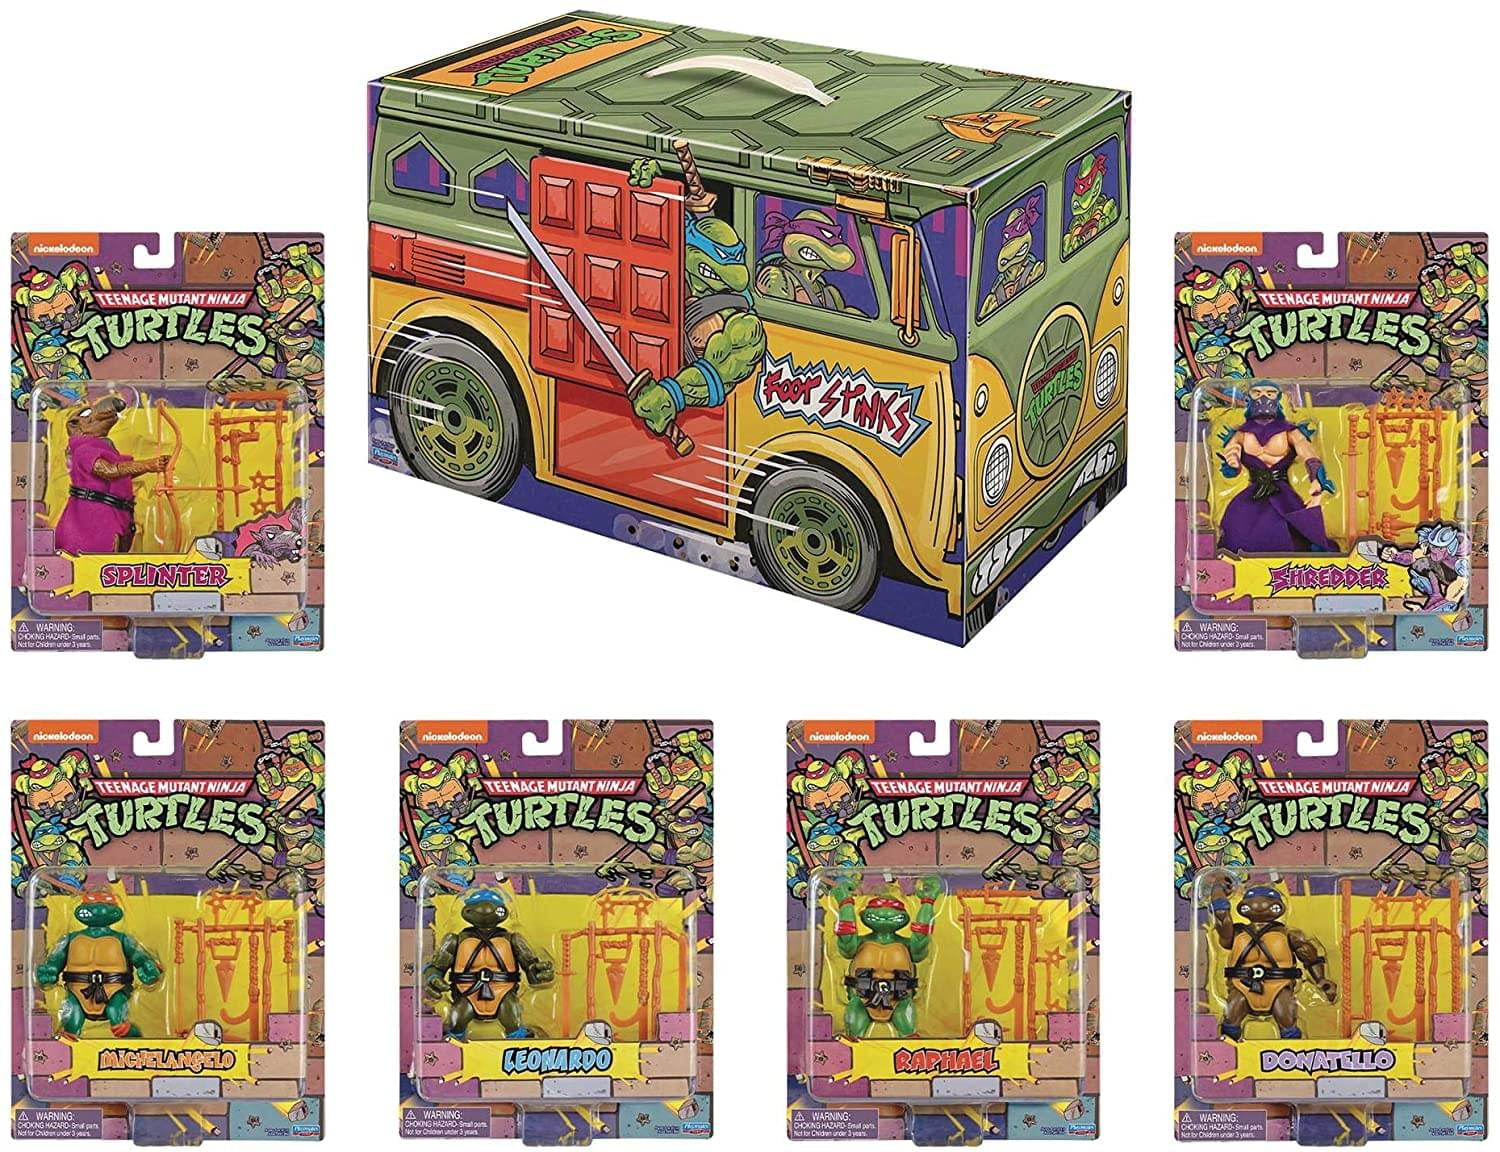 Ninja turtle goodie bagscandy bags 6 pieces and up.